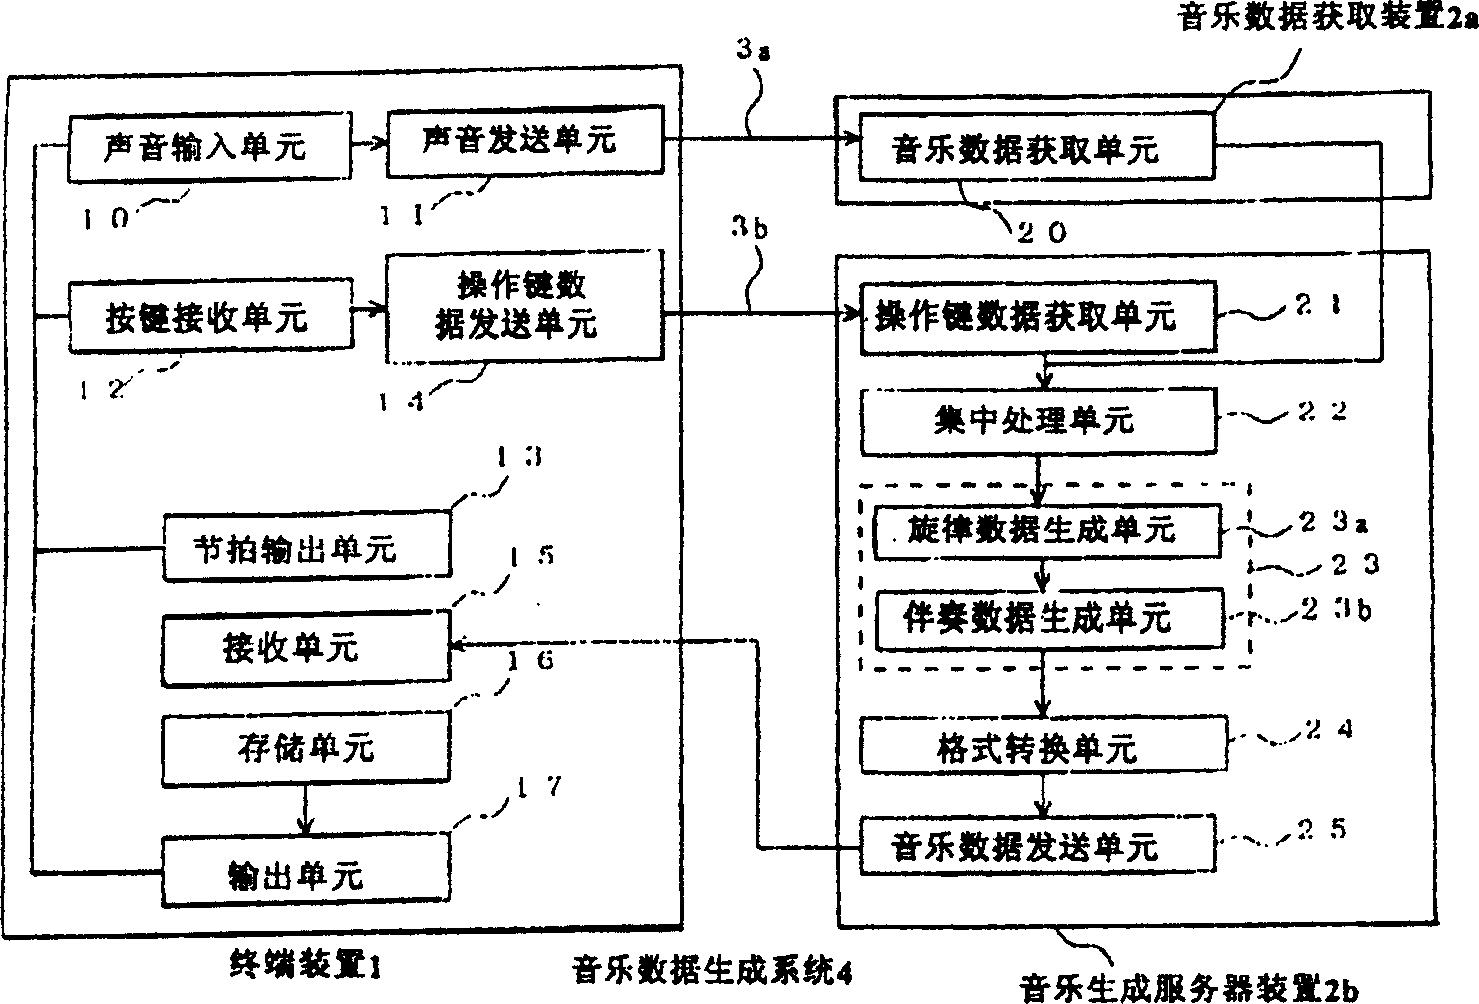 Music data producing system, server apparatus and music data producing method